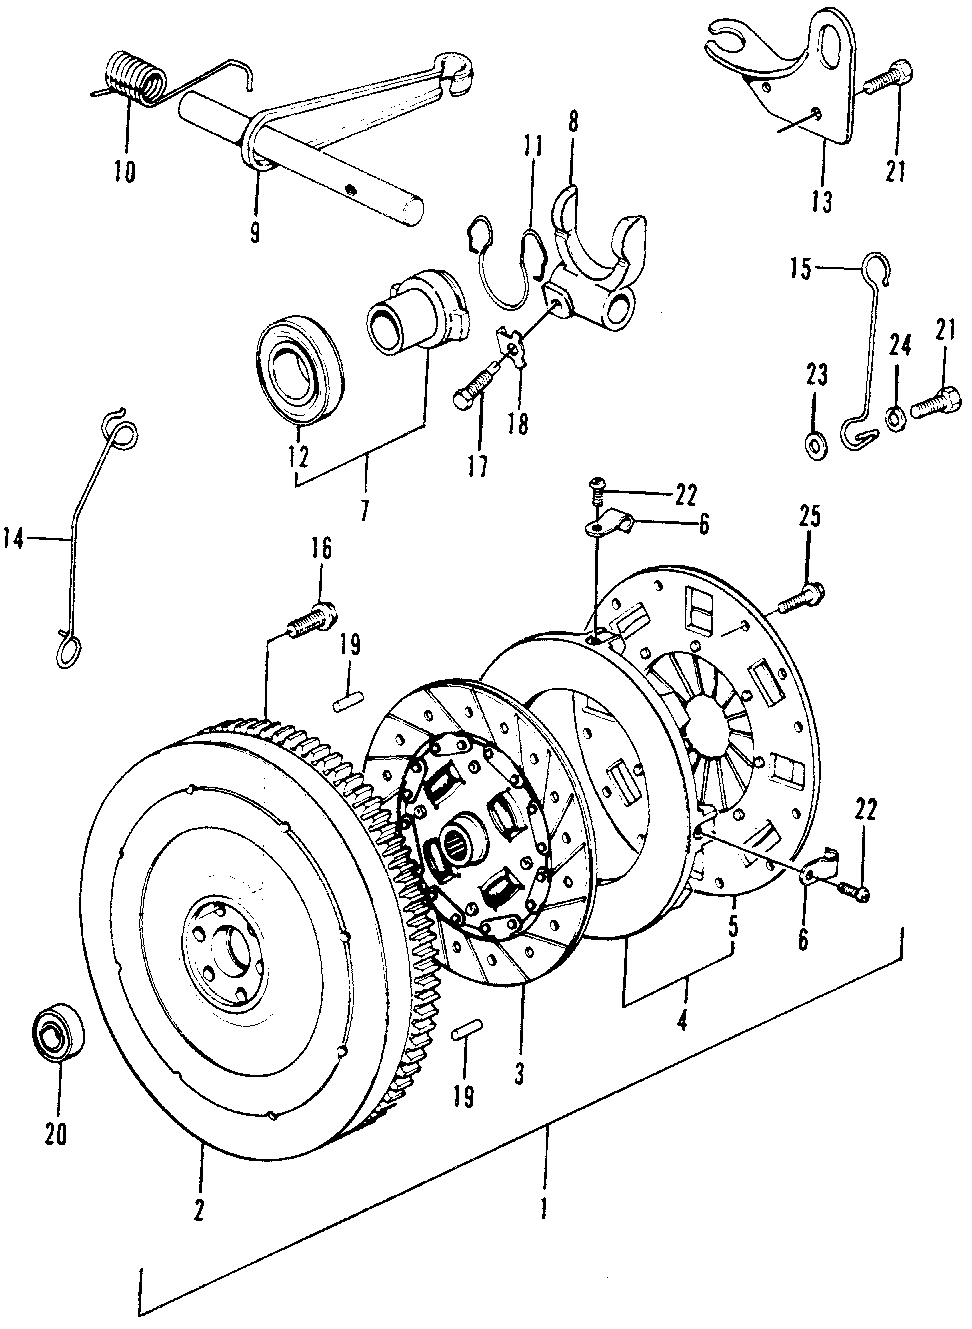 90406-PS1-000 - WASHER, LOCK